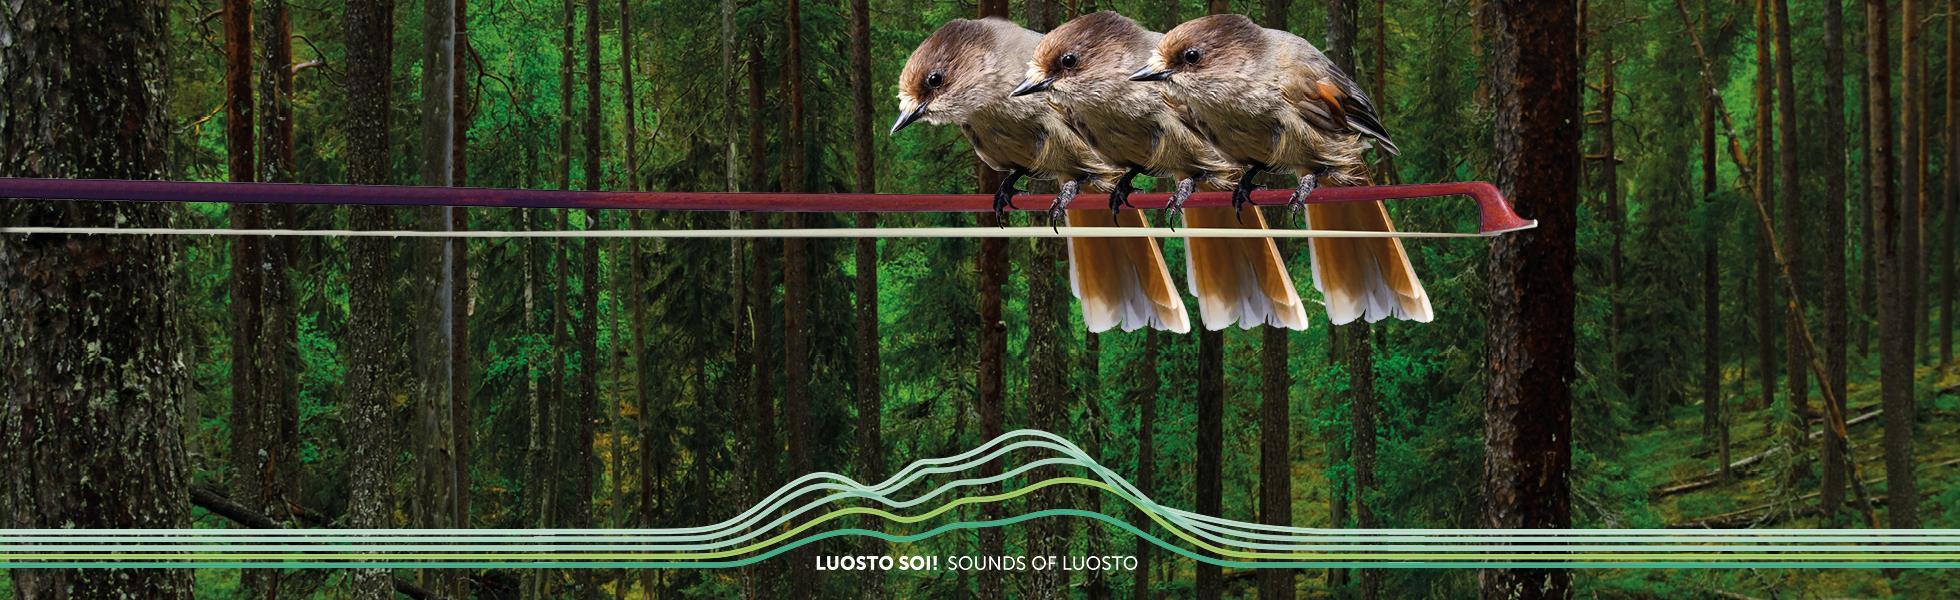 Sounds of Luosto festival expands and will host two orchestras!